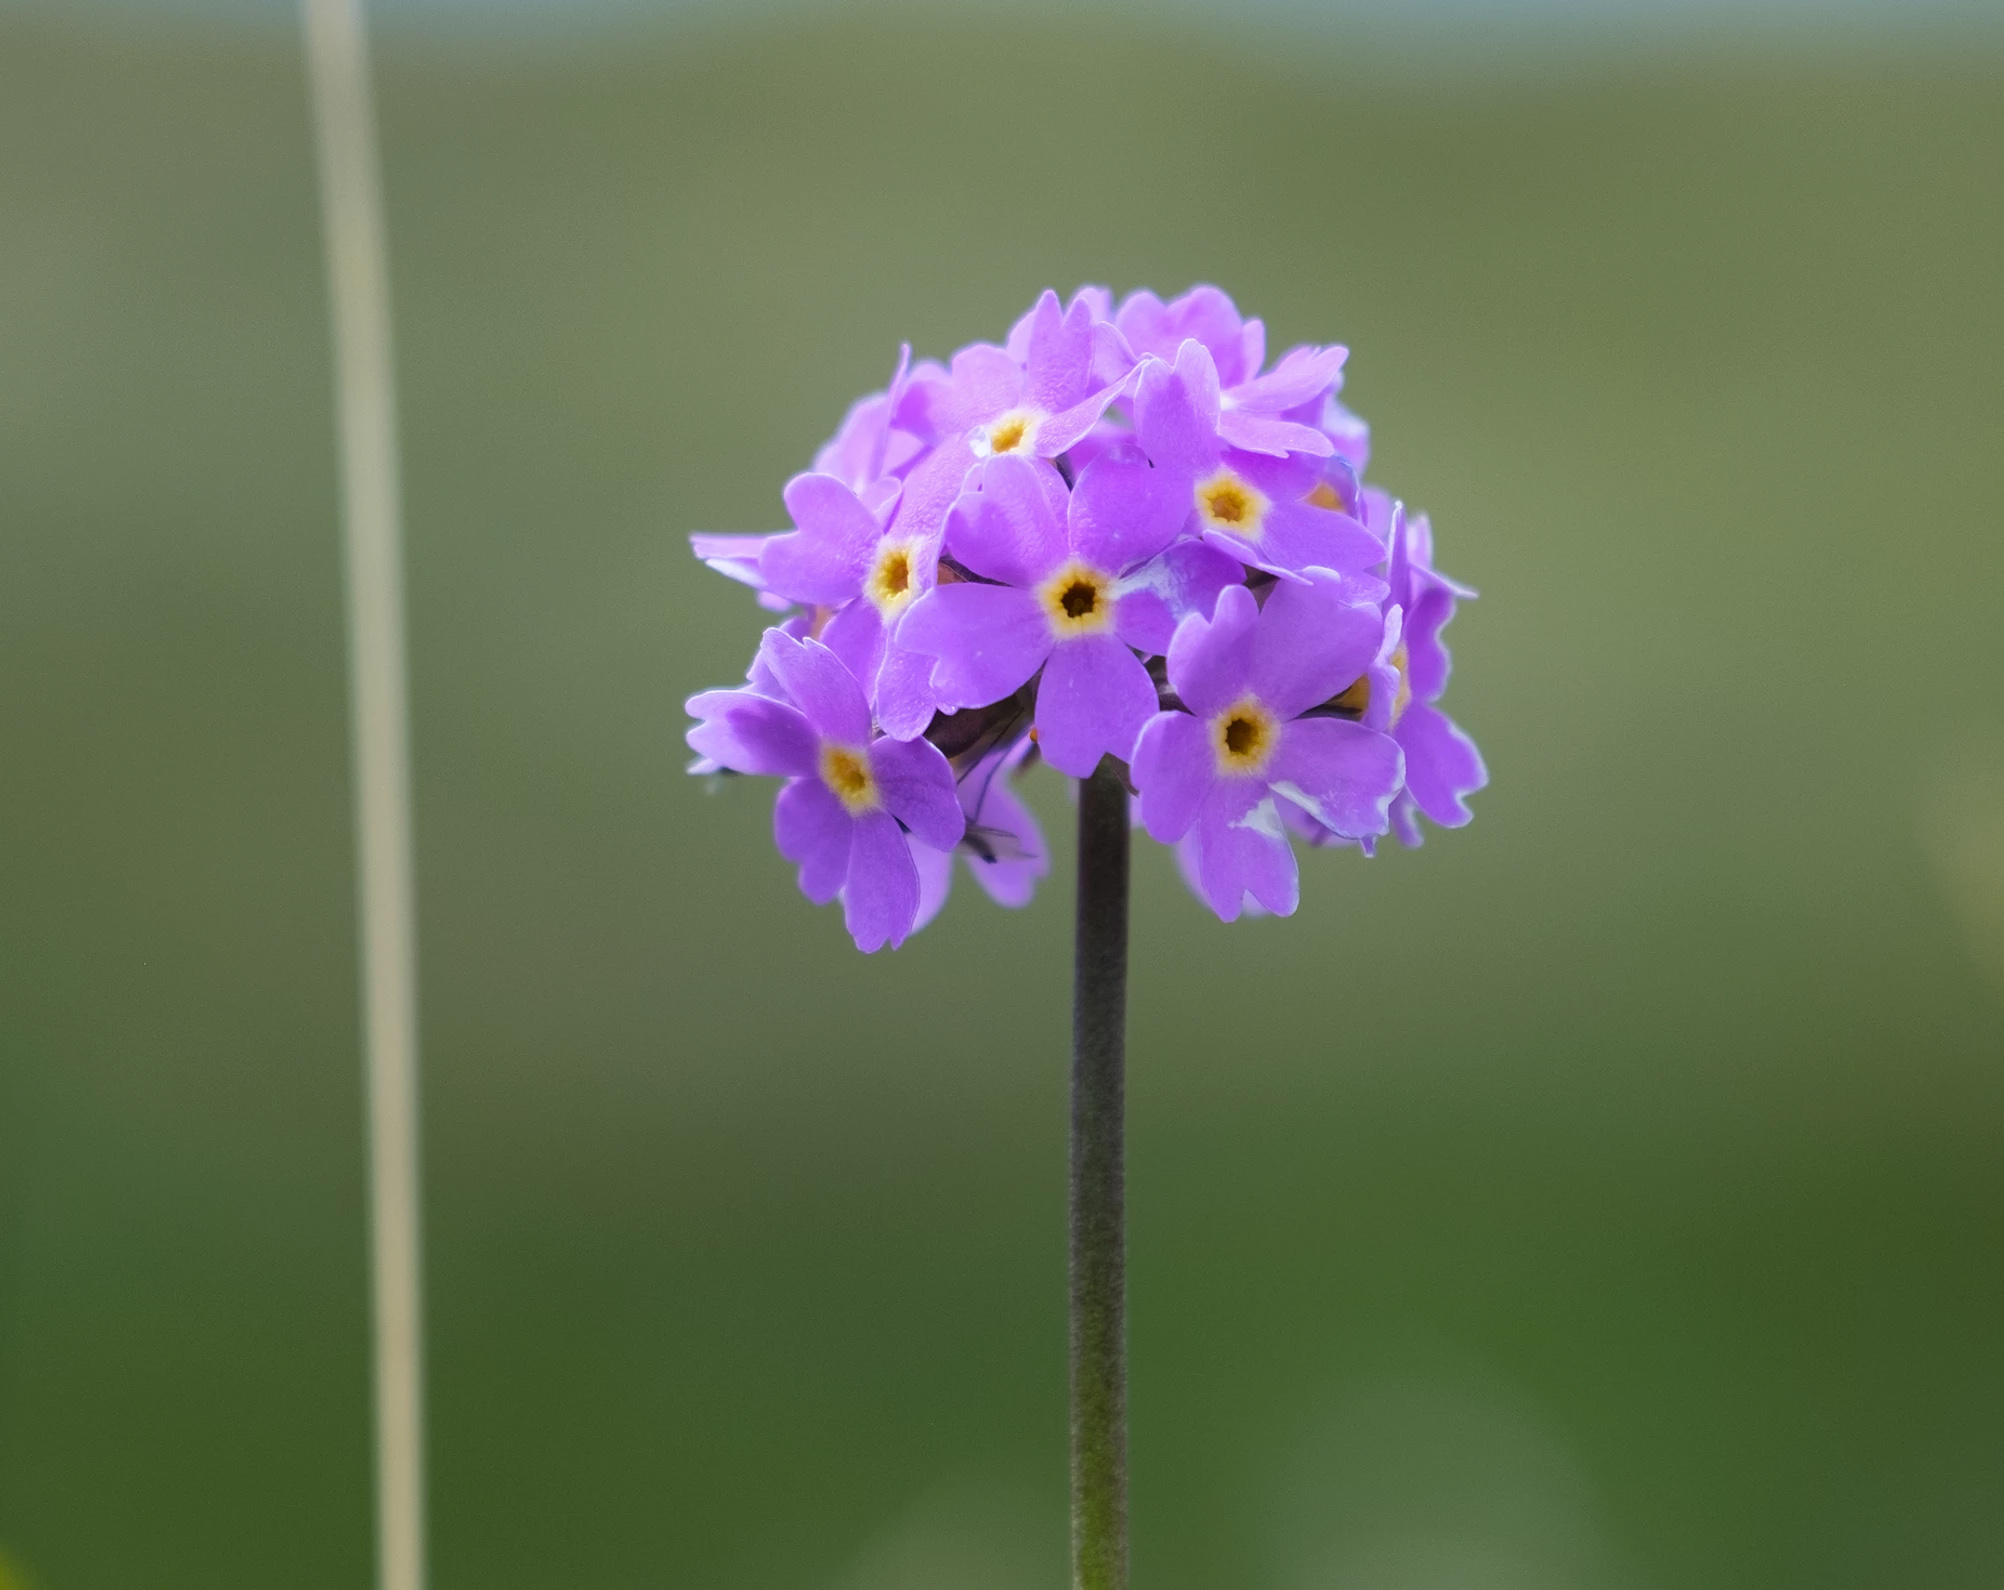 Primula rosea growing in The Altai Mountains, Mongolia